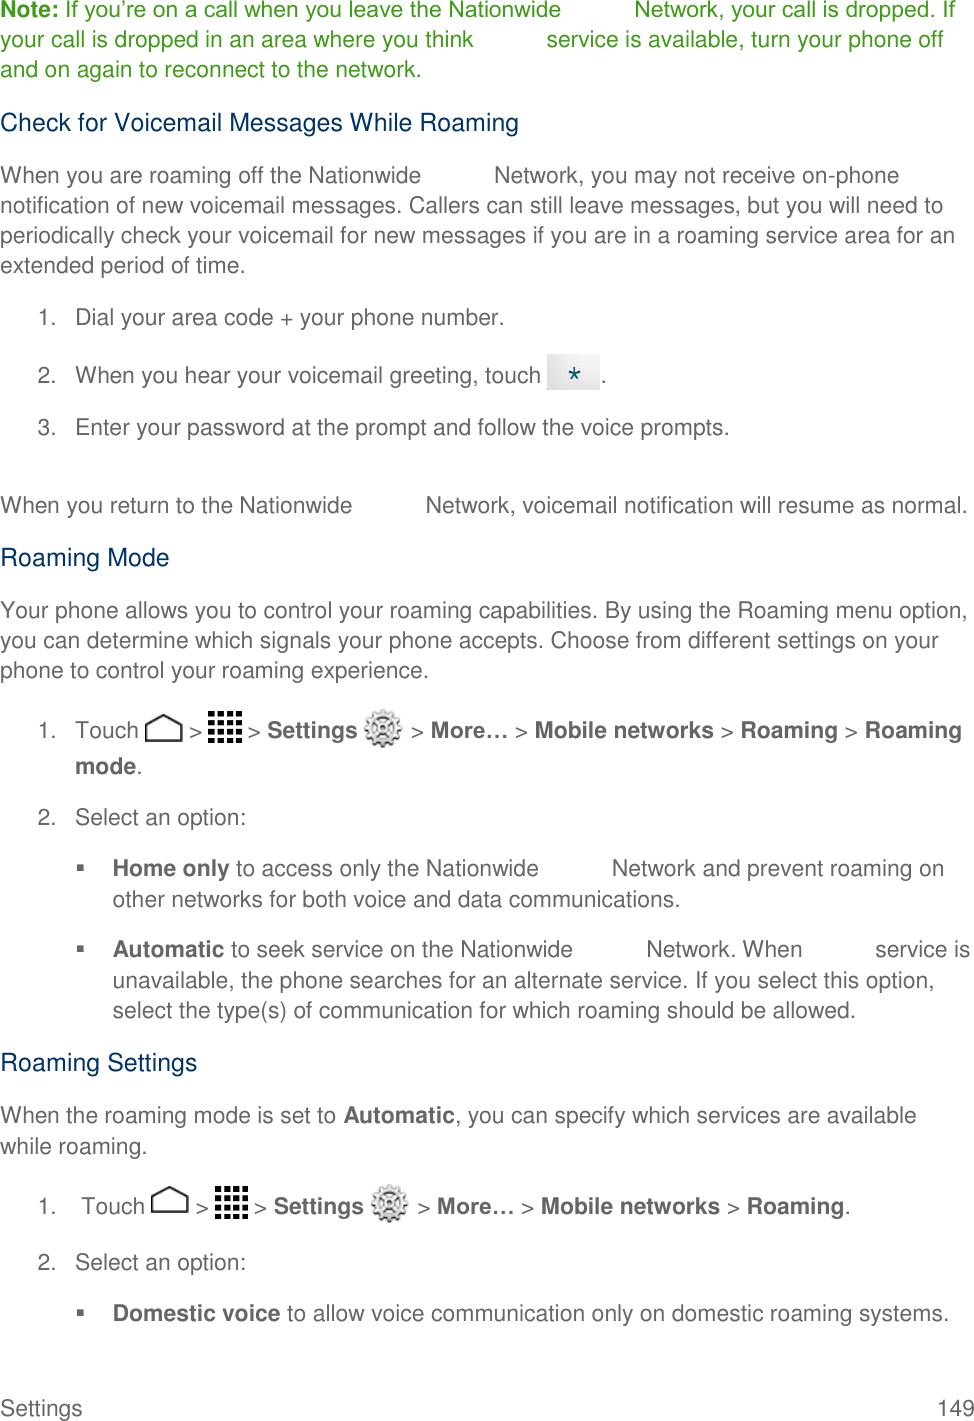 Settings  149 Note: If you’re on a call when you leave the Nationwide   Network, your call is dropped. If your call is dropped in an area where you think   service is available, turn your phone off and on again to reconnect to the network. Check for Voicemail Messages While Roaming  When you are roaming off the Nationwide   Network, you may not receive on-phone notification of new voicemail messages. Callers can still leave messages, but you will need to periodically check your voicemail for new messages if you are in a roaming service area for an extended period of time.  1.  Dial your area code + your phone number.  2. When you hear your voicemail greeting, touch  .  3. Enter your password at the prompt and follow the voice prompts.   When you return to the Nationwide   Network, voicemail notification will resume as normal.  Roaming Mode Your phone allows you to control your roaming capabilities. By using the Roaming menu option, you can determine which signals your phone accepts. Choose from different settings on your phone to control your roaming experience.  1.  Touch   &gt;   &gt; Settings   &gt; More… &gt; Mobile networks &gt; Roaming &gt; Roaming mode.  2. Select an option:   Home only to access only the Nationwide   Network and prevent roaming on other networks for both voice and data communications.   Automatic to seek service on the Nationwide   Network. When   service is unavailable, the phone searches for an alternate service. If you select this option, select the type(s) of communication for which roaming should be allowed.  Roaming Settings When the roaming mode is set to Automatic, you can specify which services are available while roaming.  1.  Touch   &gt;   &gt; Settings   &gt; More… &gt; Mobile networks &gt; Roaming.  2. Select an option:   Domestic voice to allow voice communication only on domestic roaming systems.  